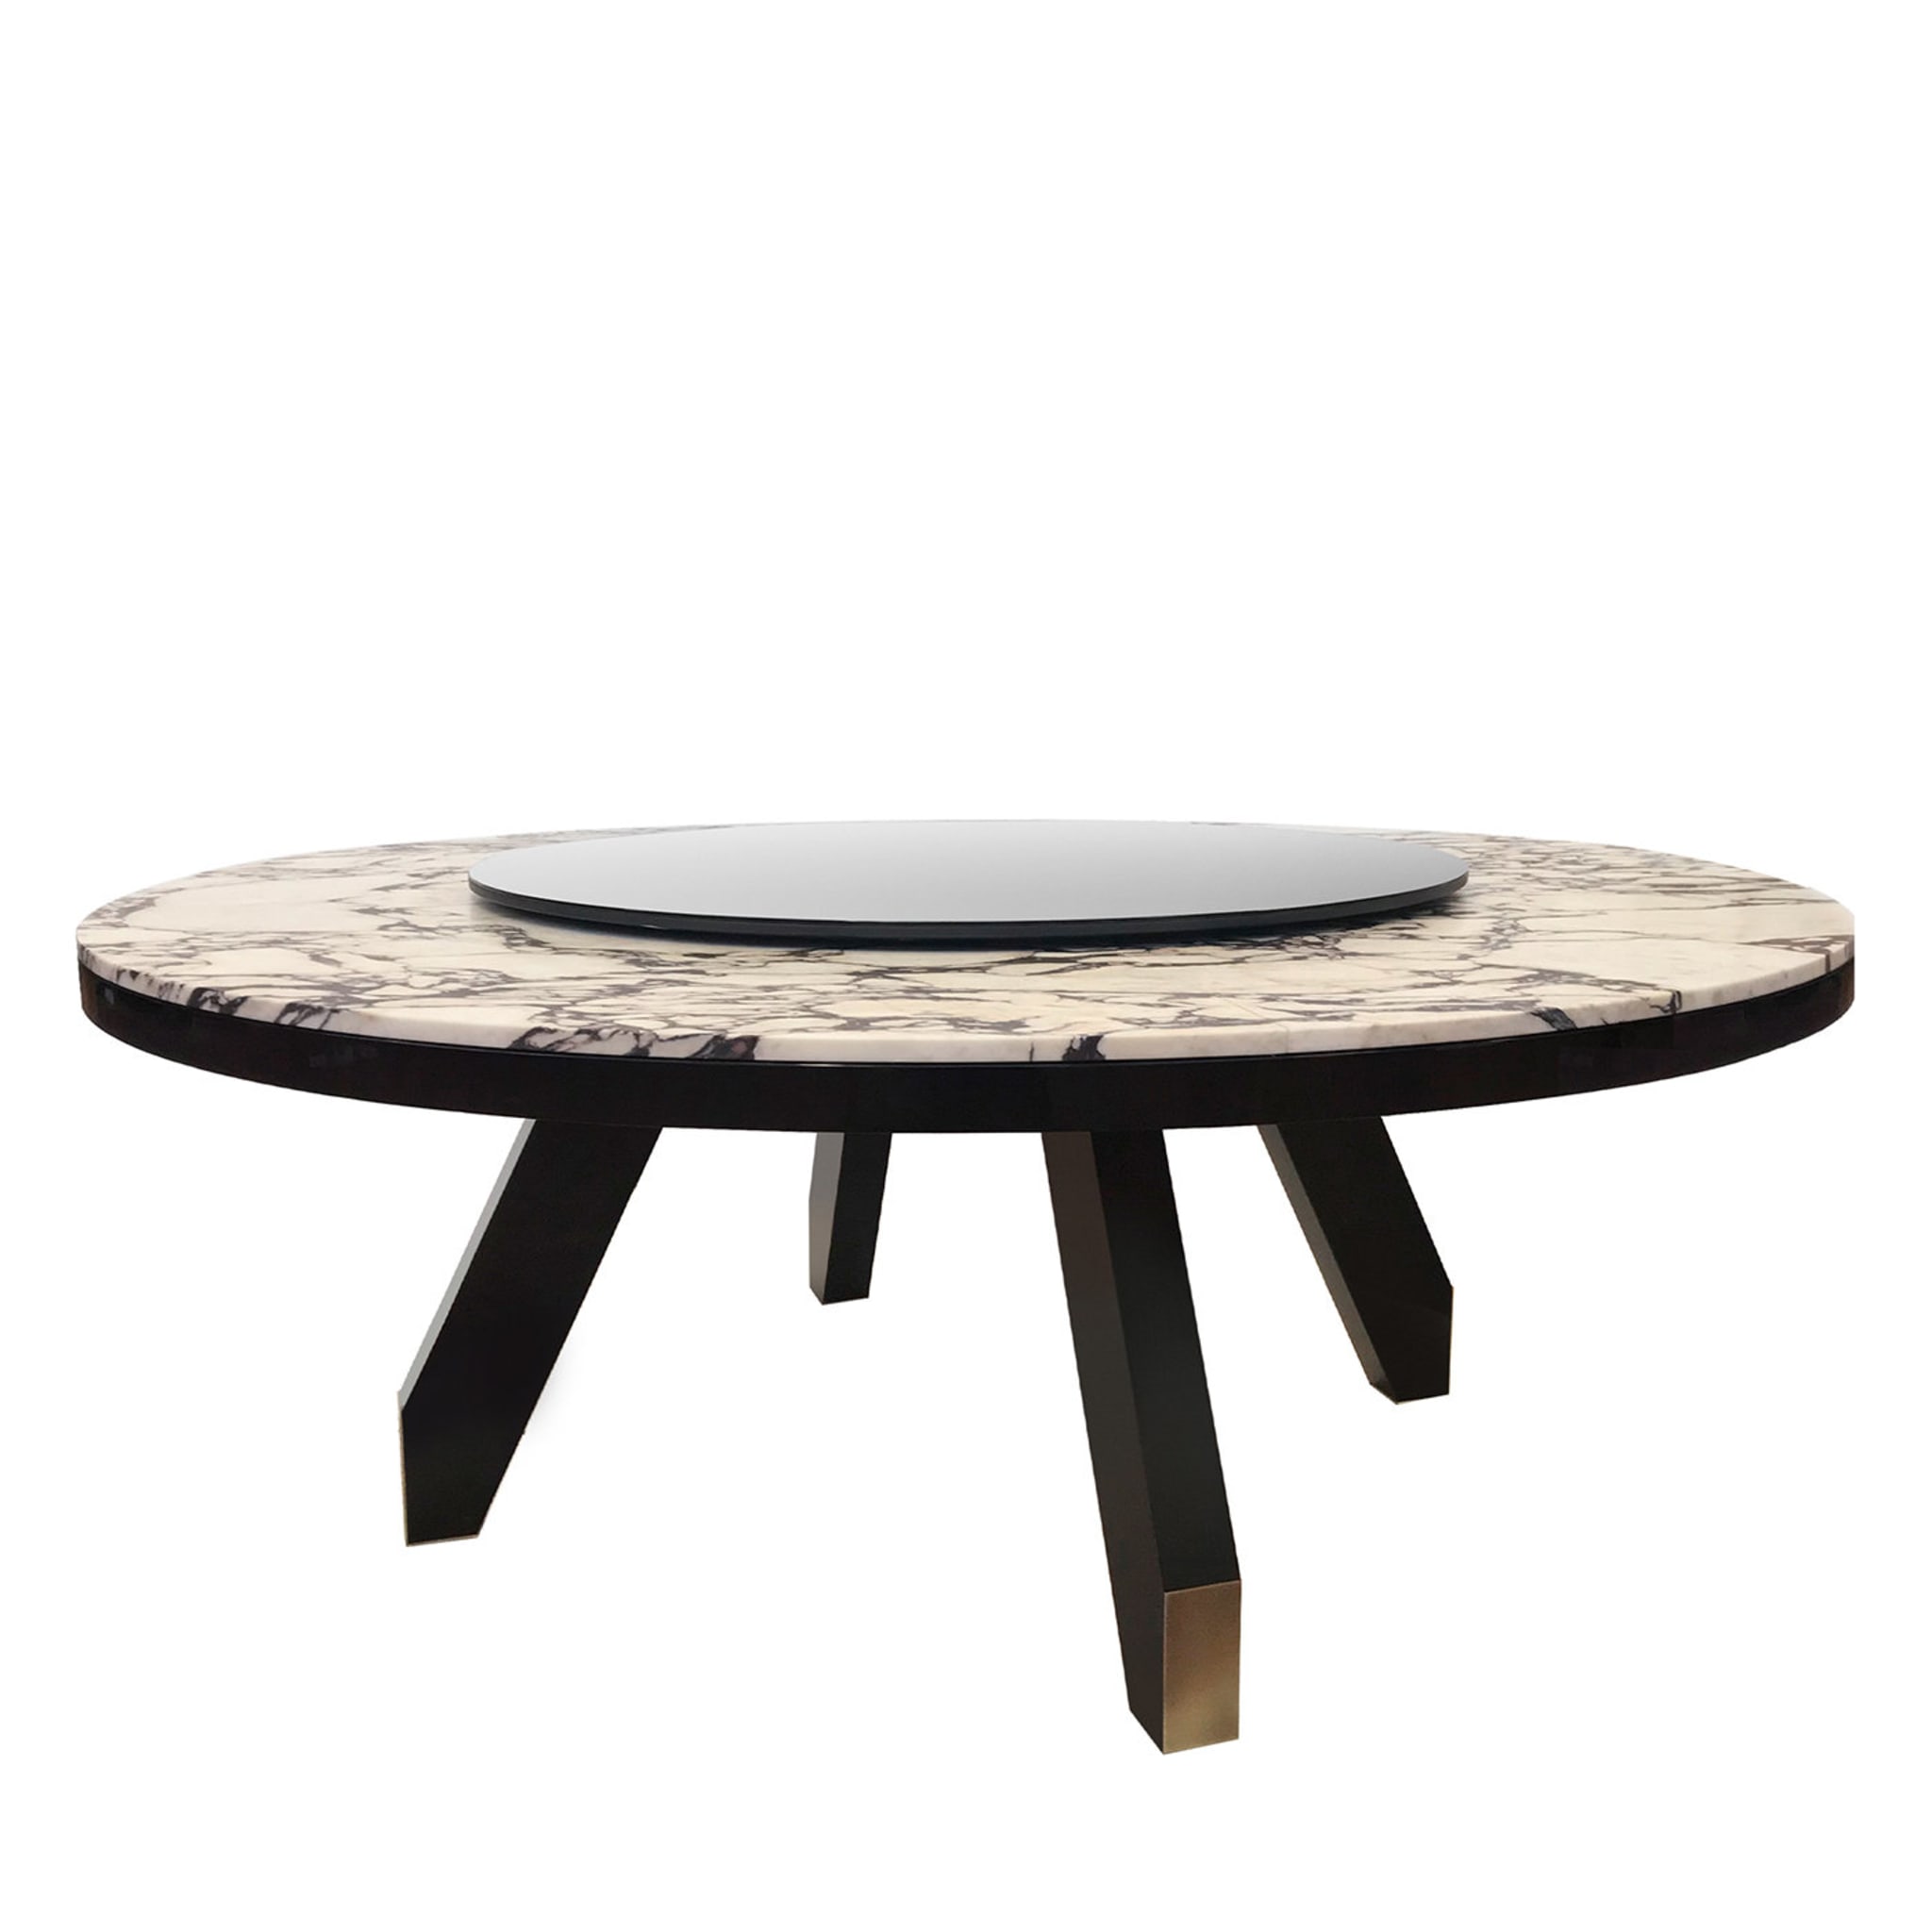 Boscolo Table with Lazy Susan by Bosco Fair - Main view